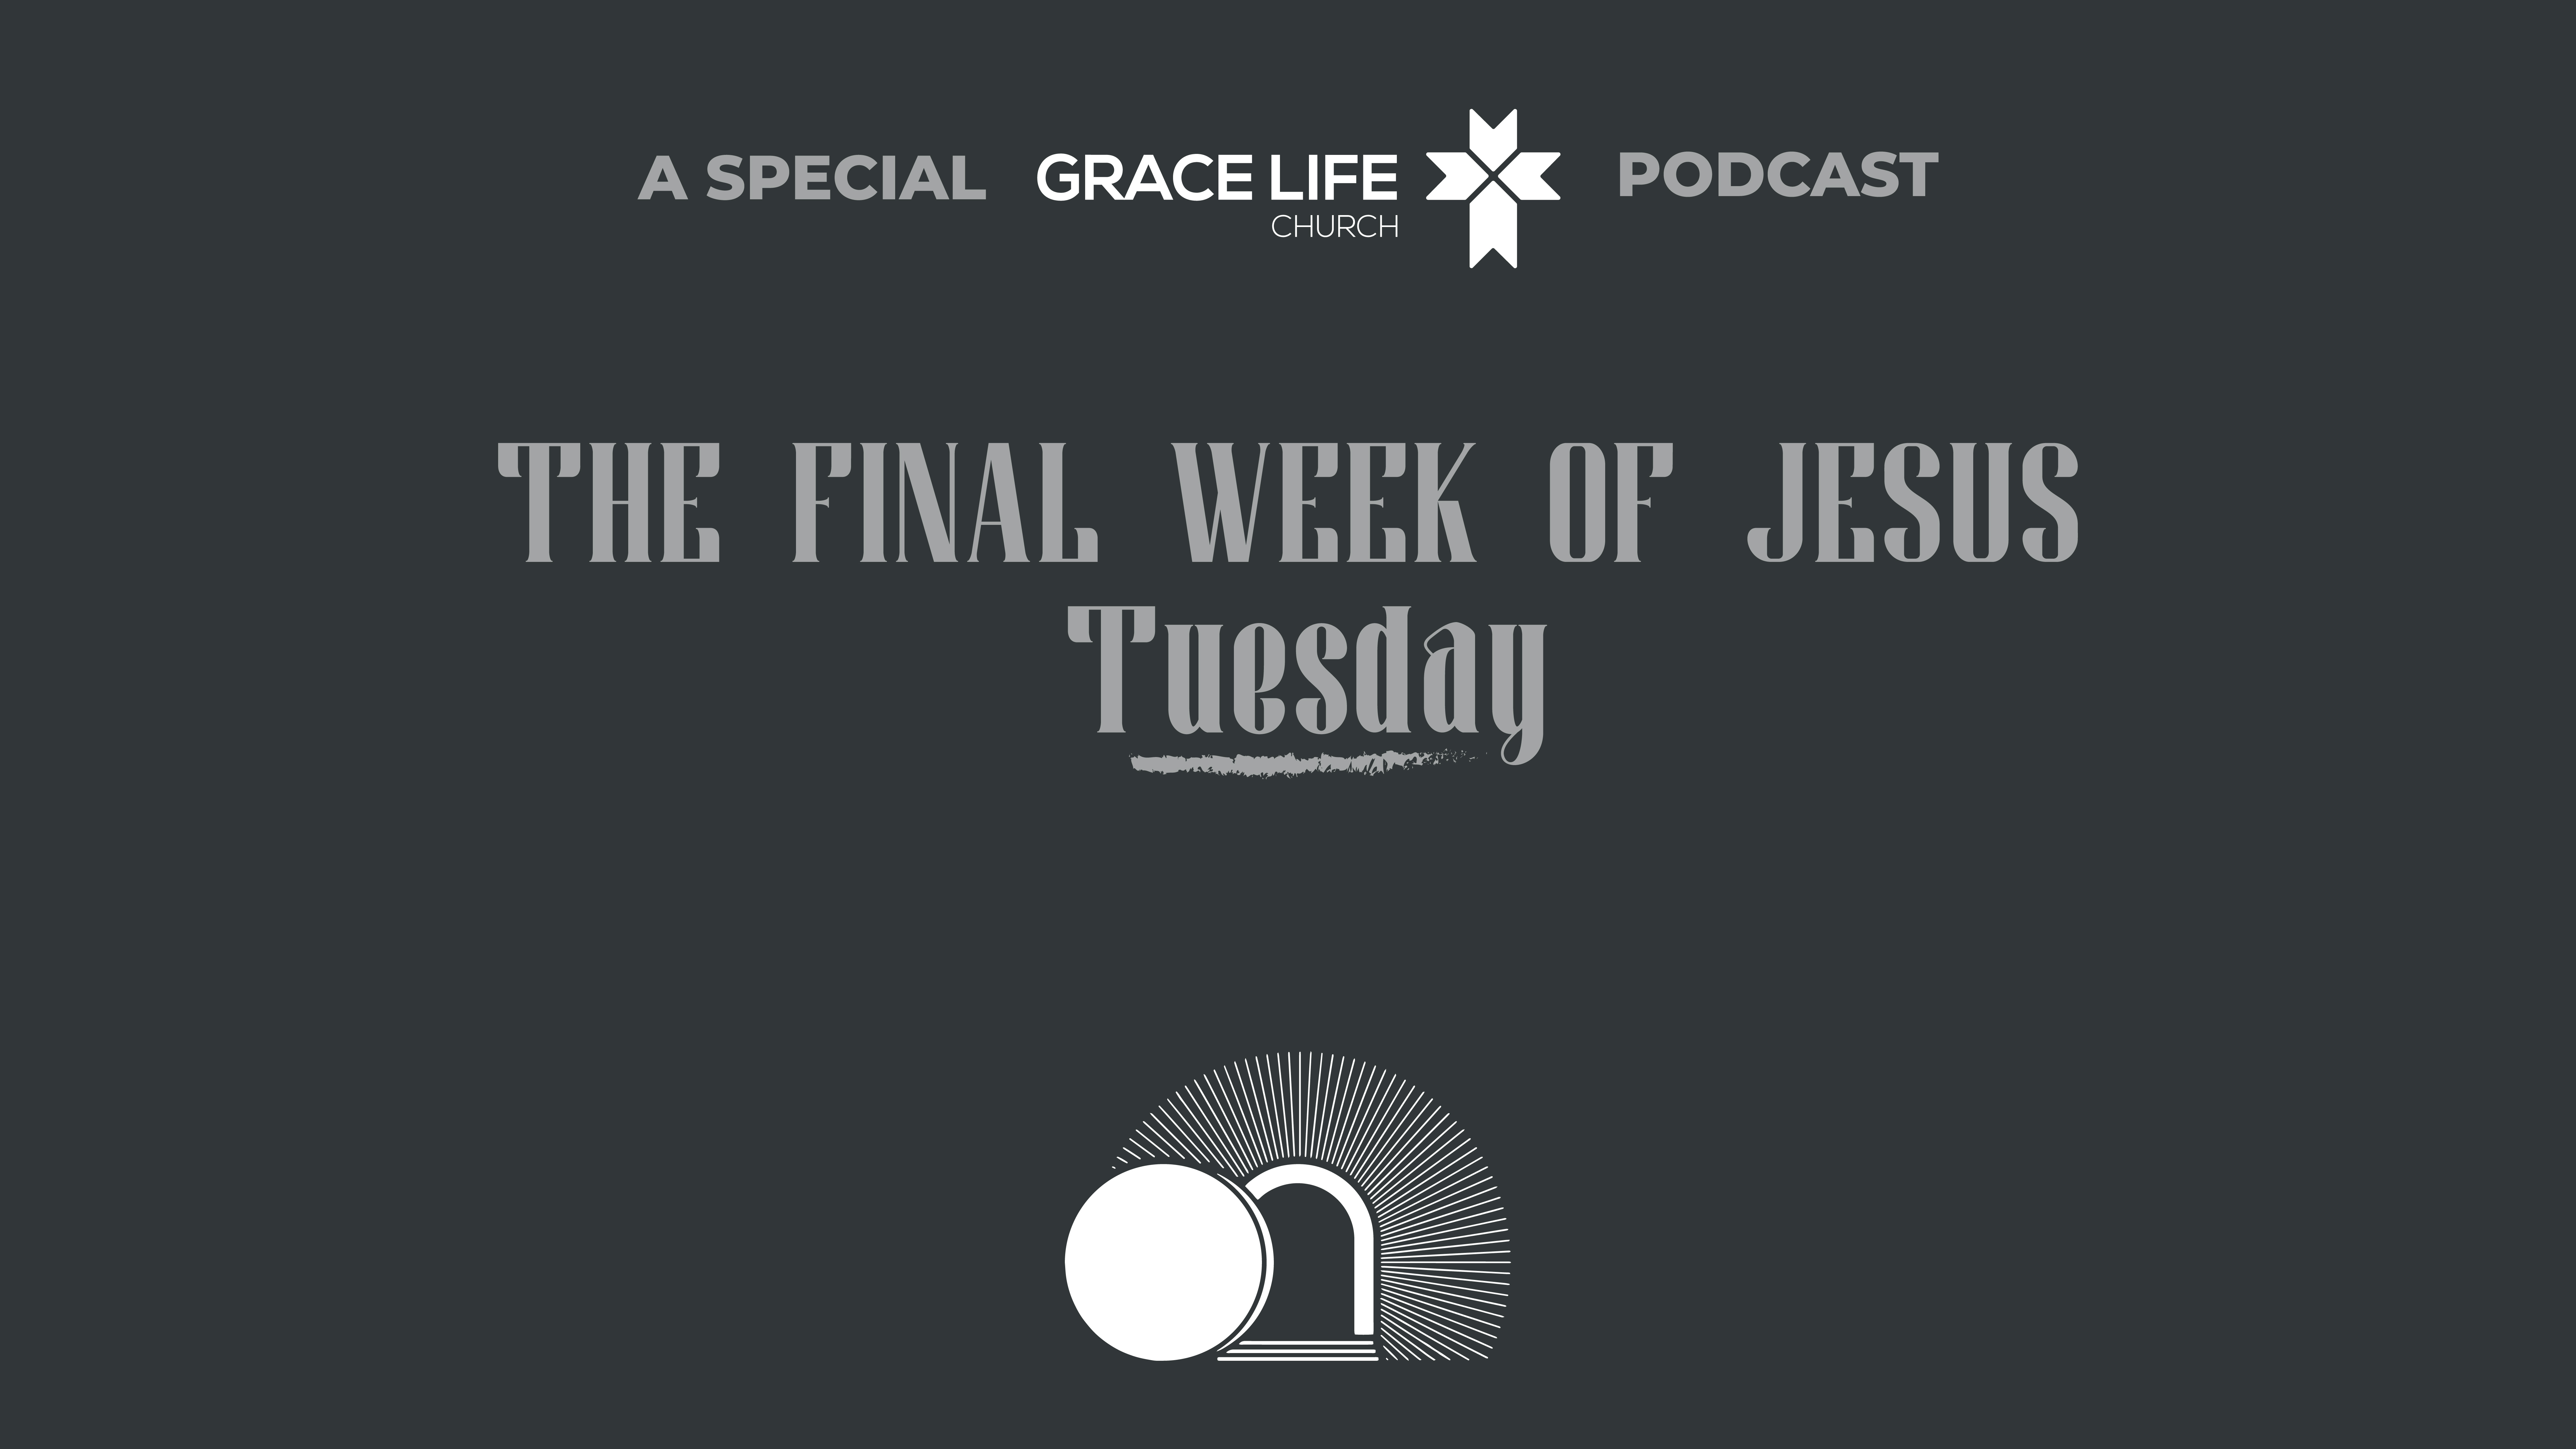 Tuesday: The Final Week of Jesus